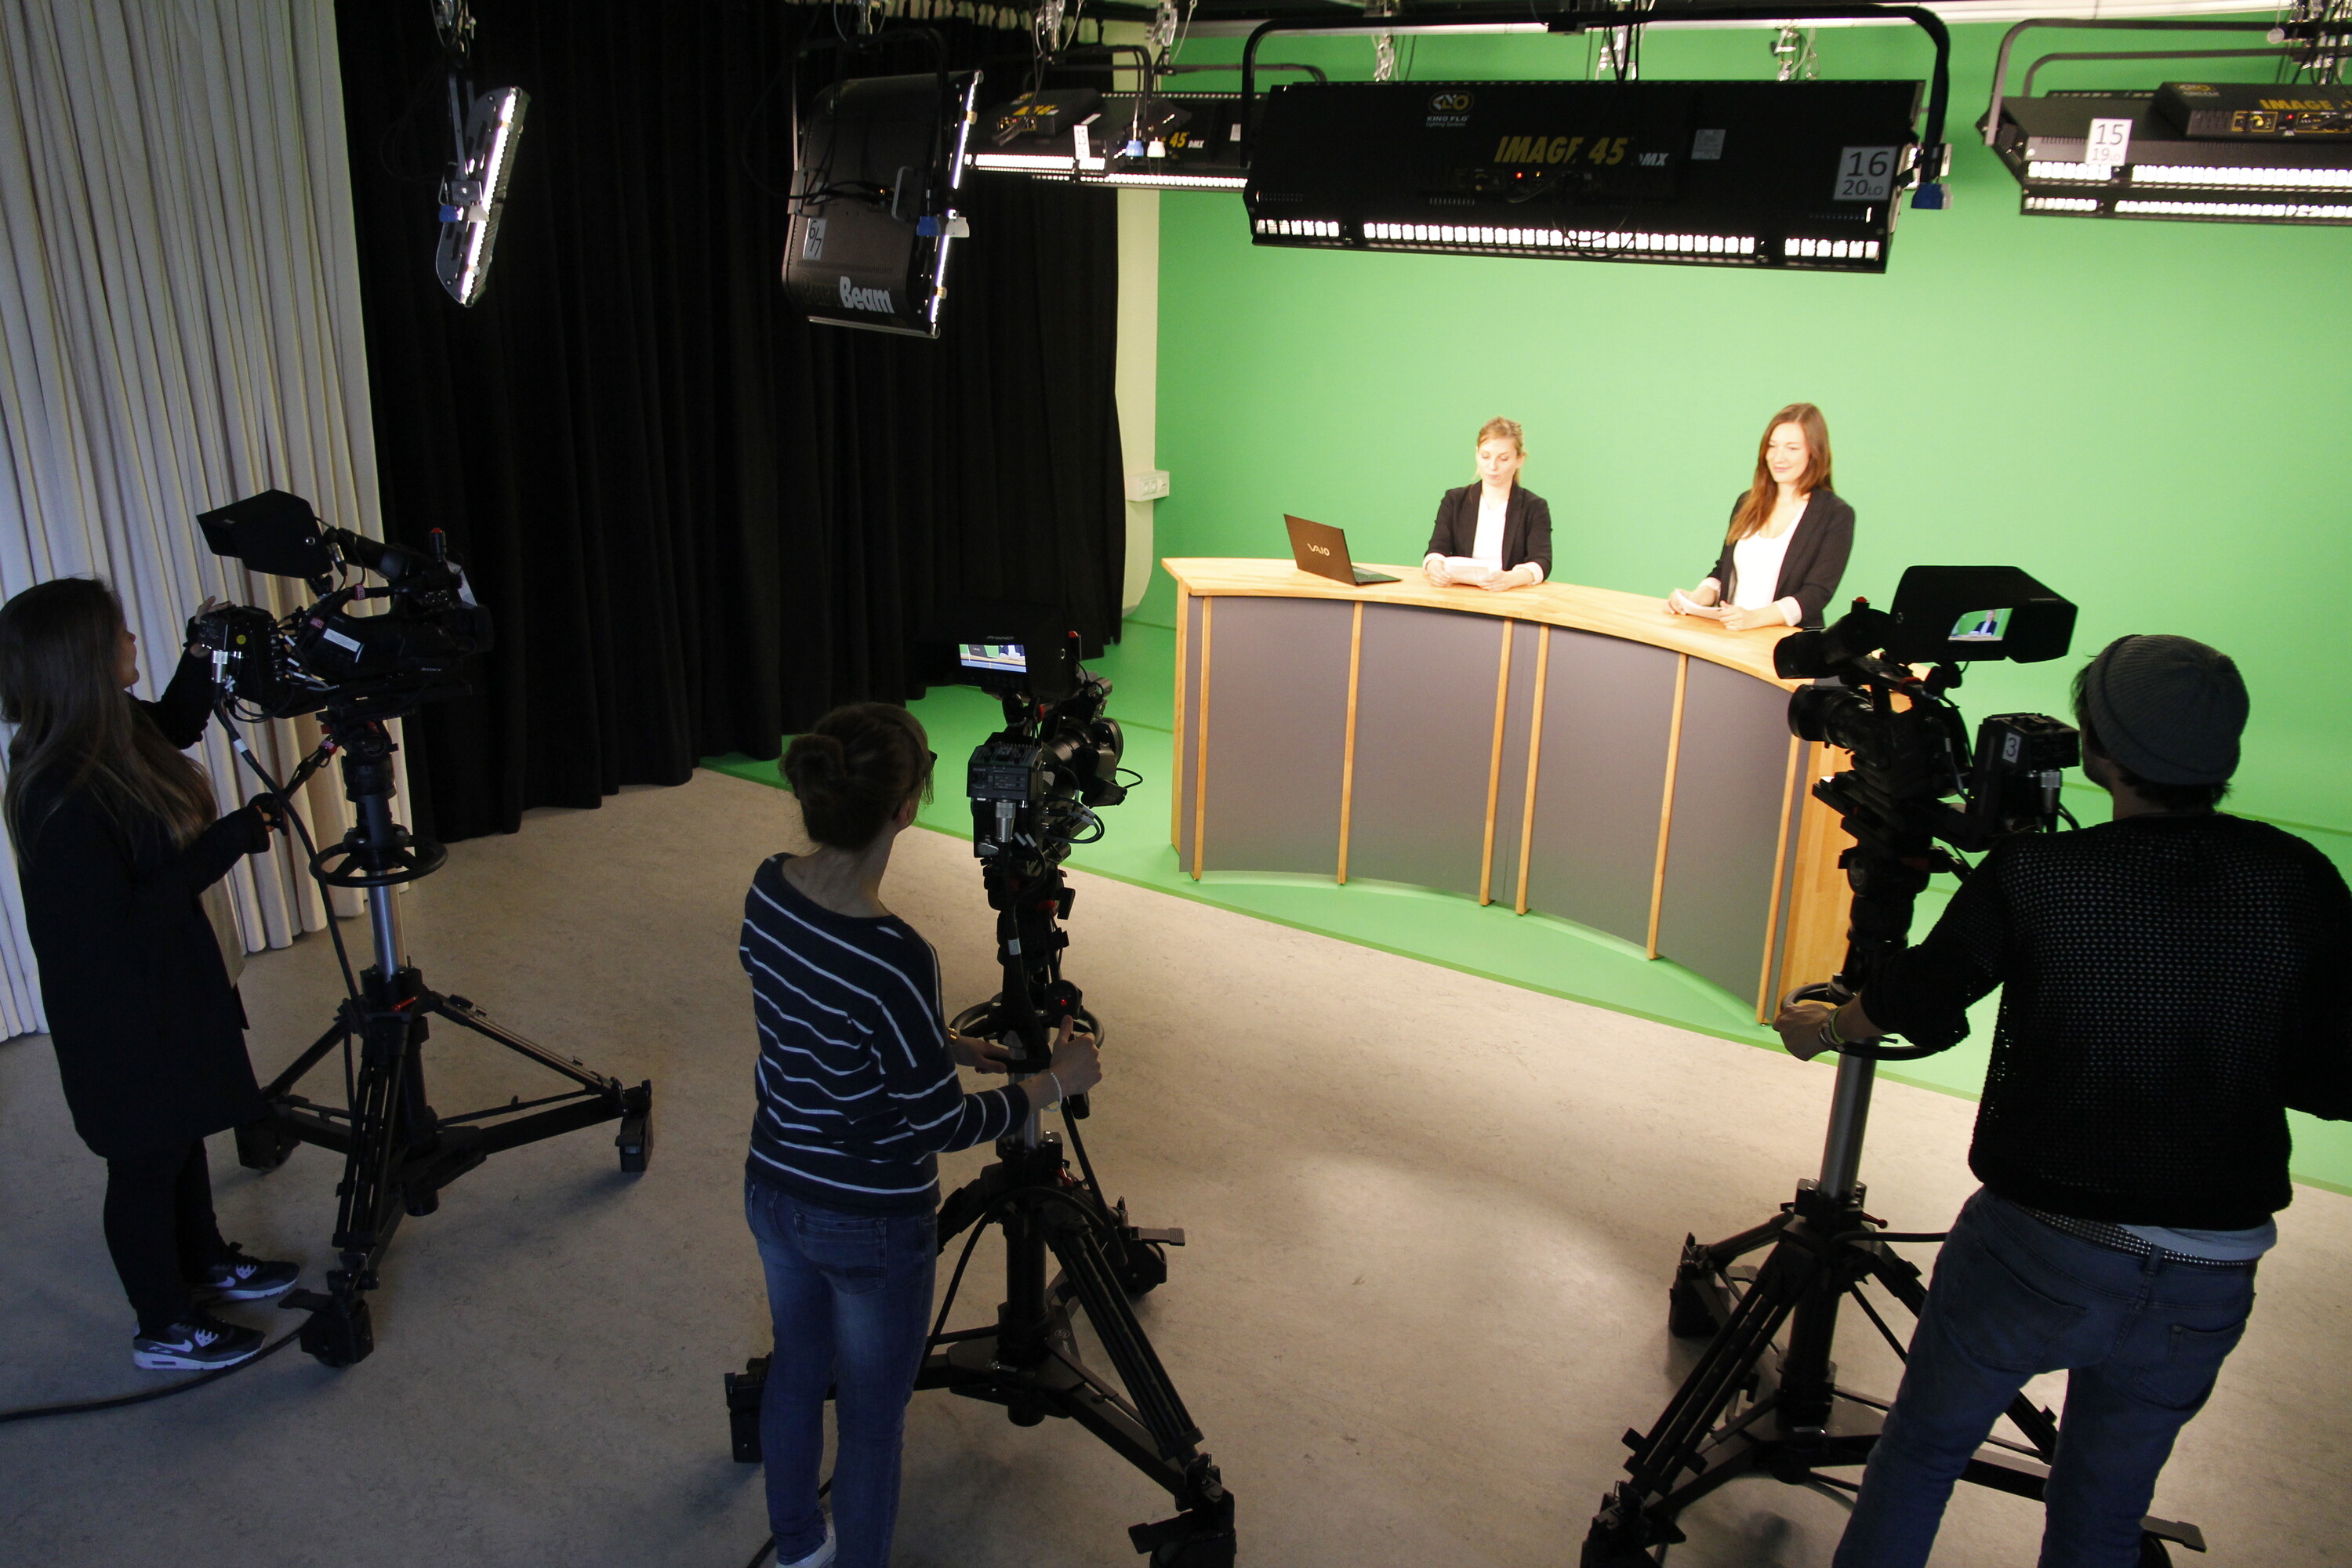 Overview of the TV studio where students produce a programme